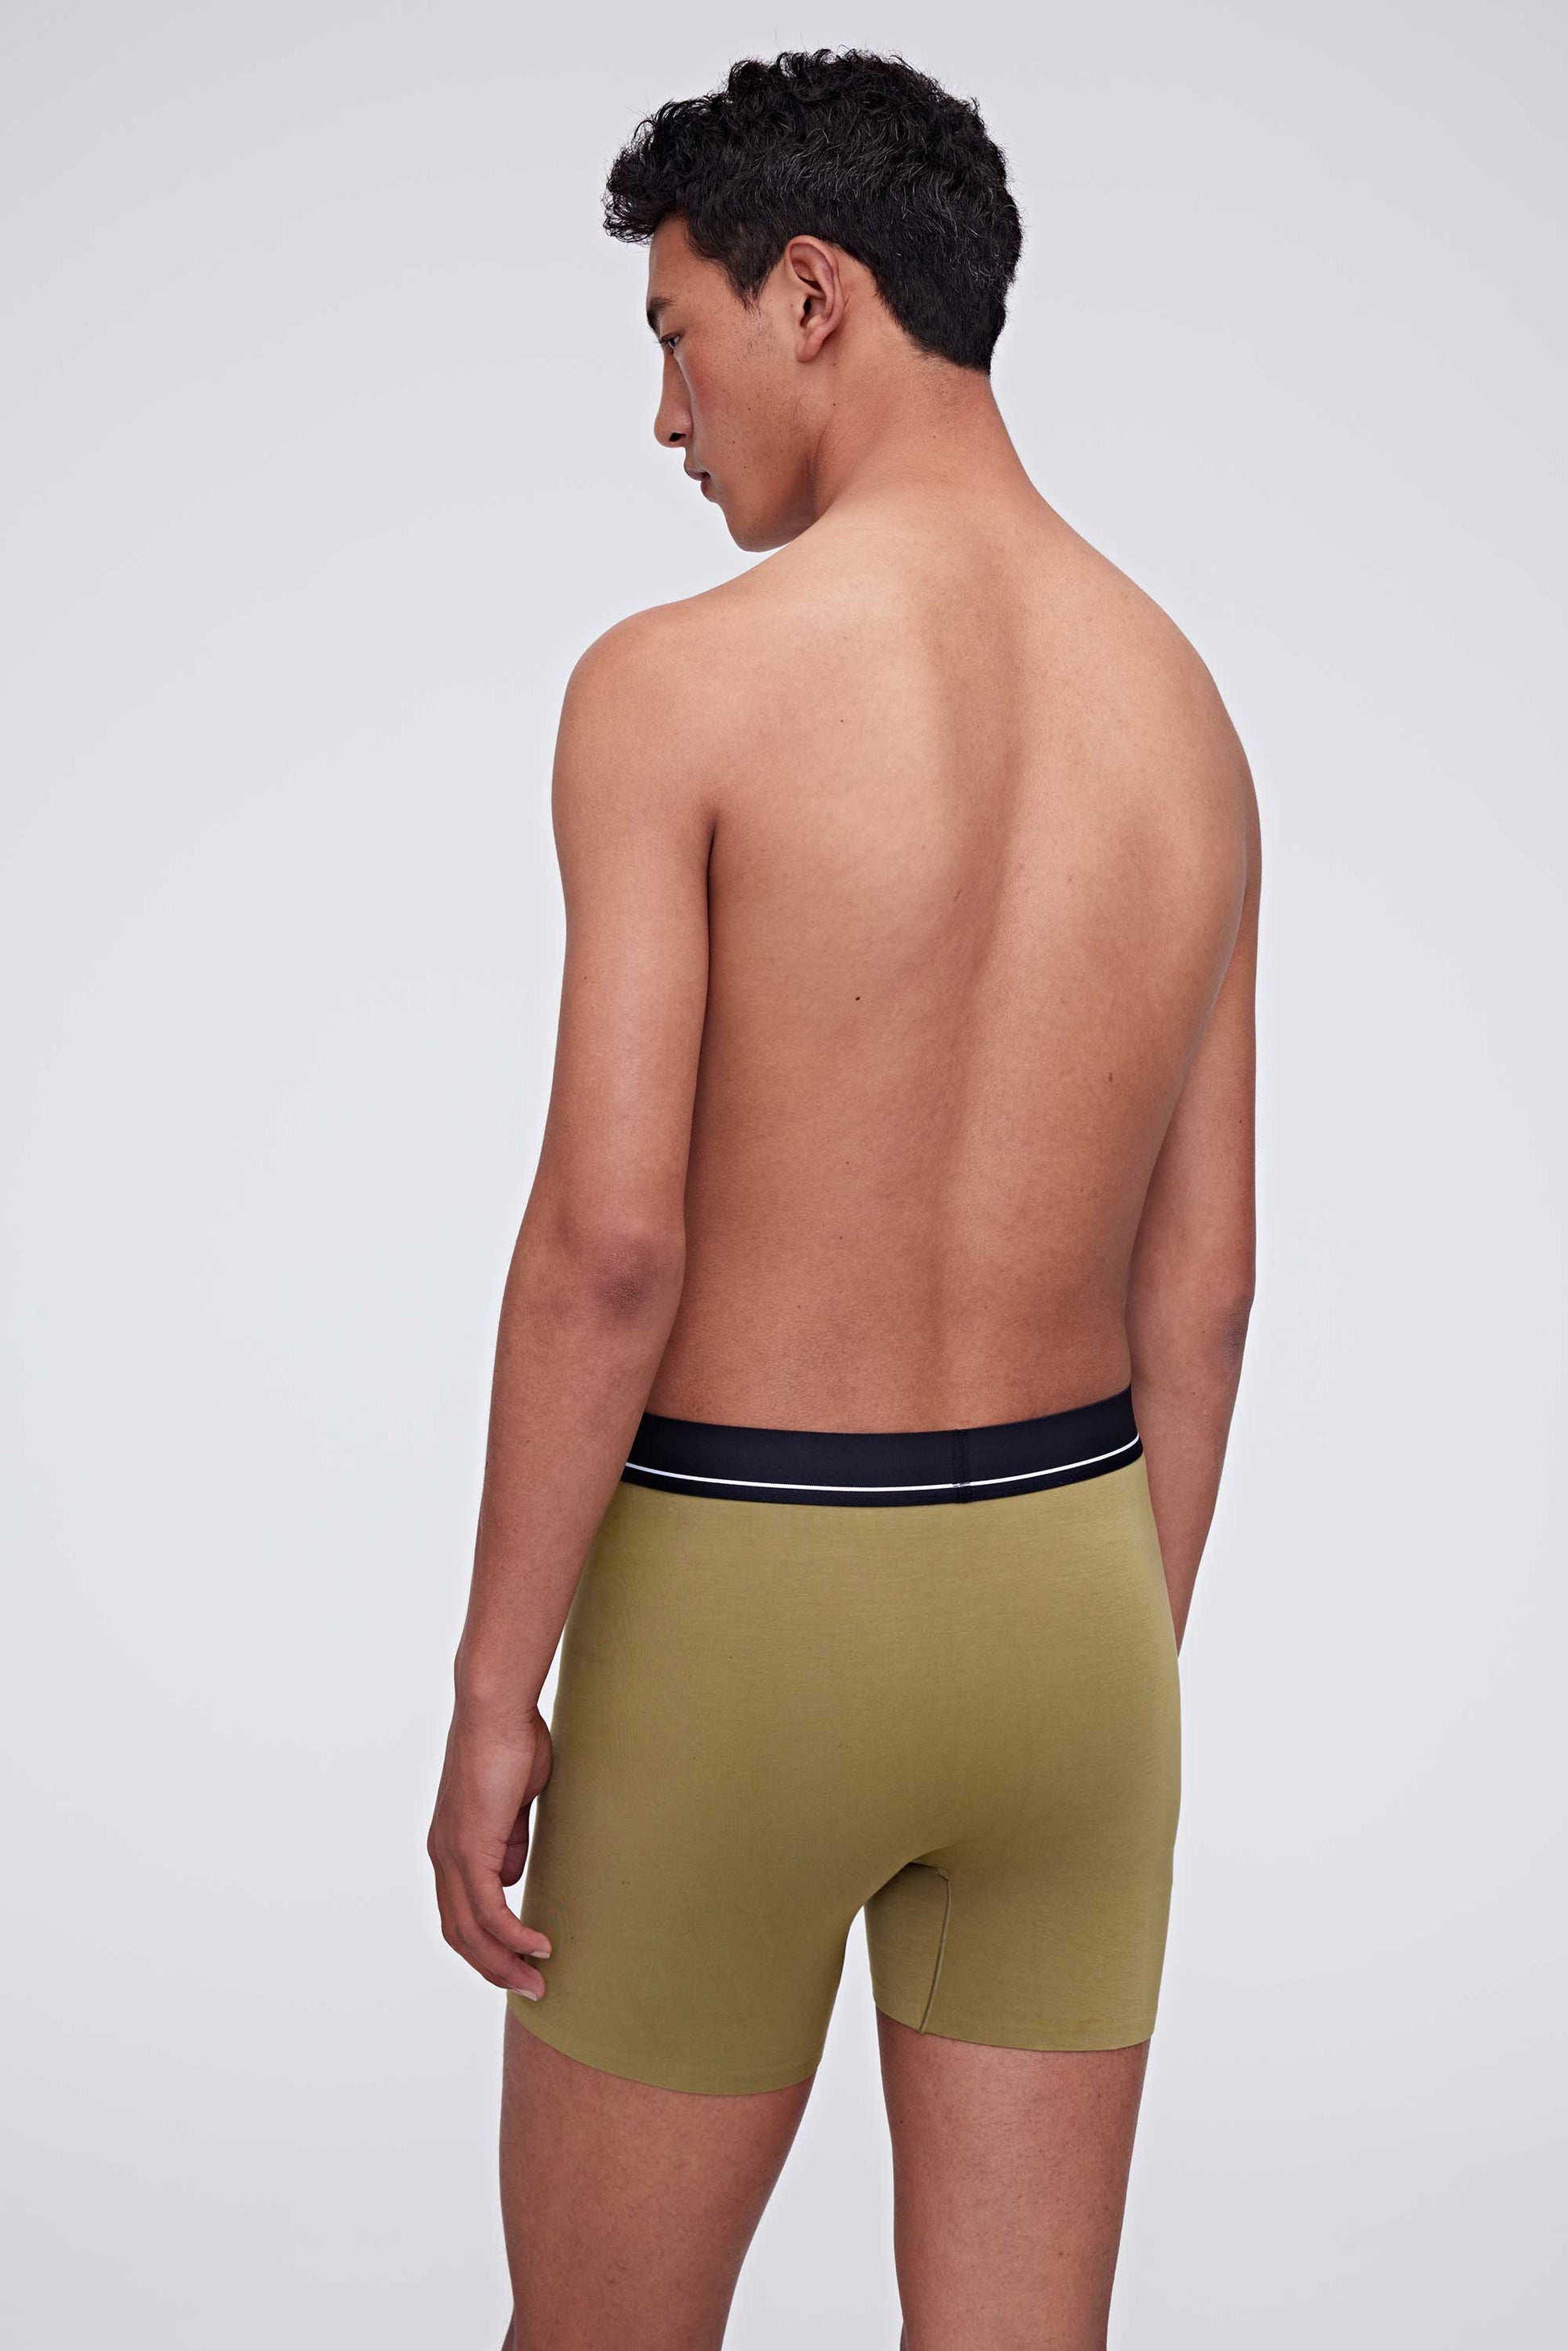 back of man in green brief